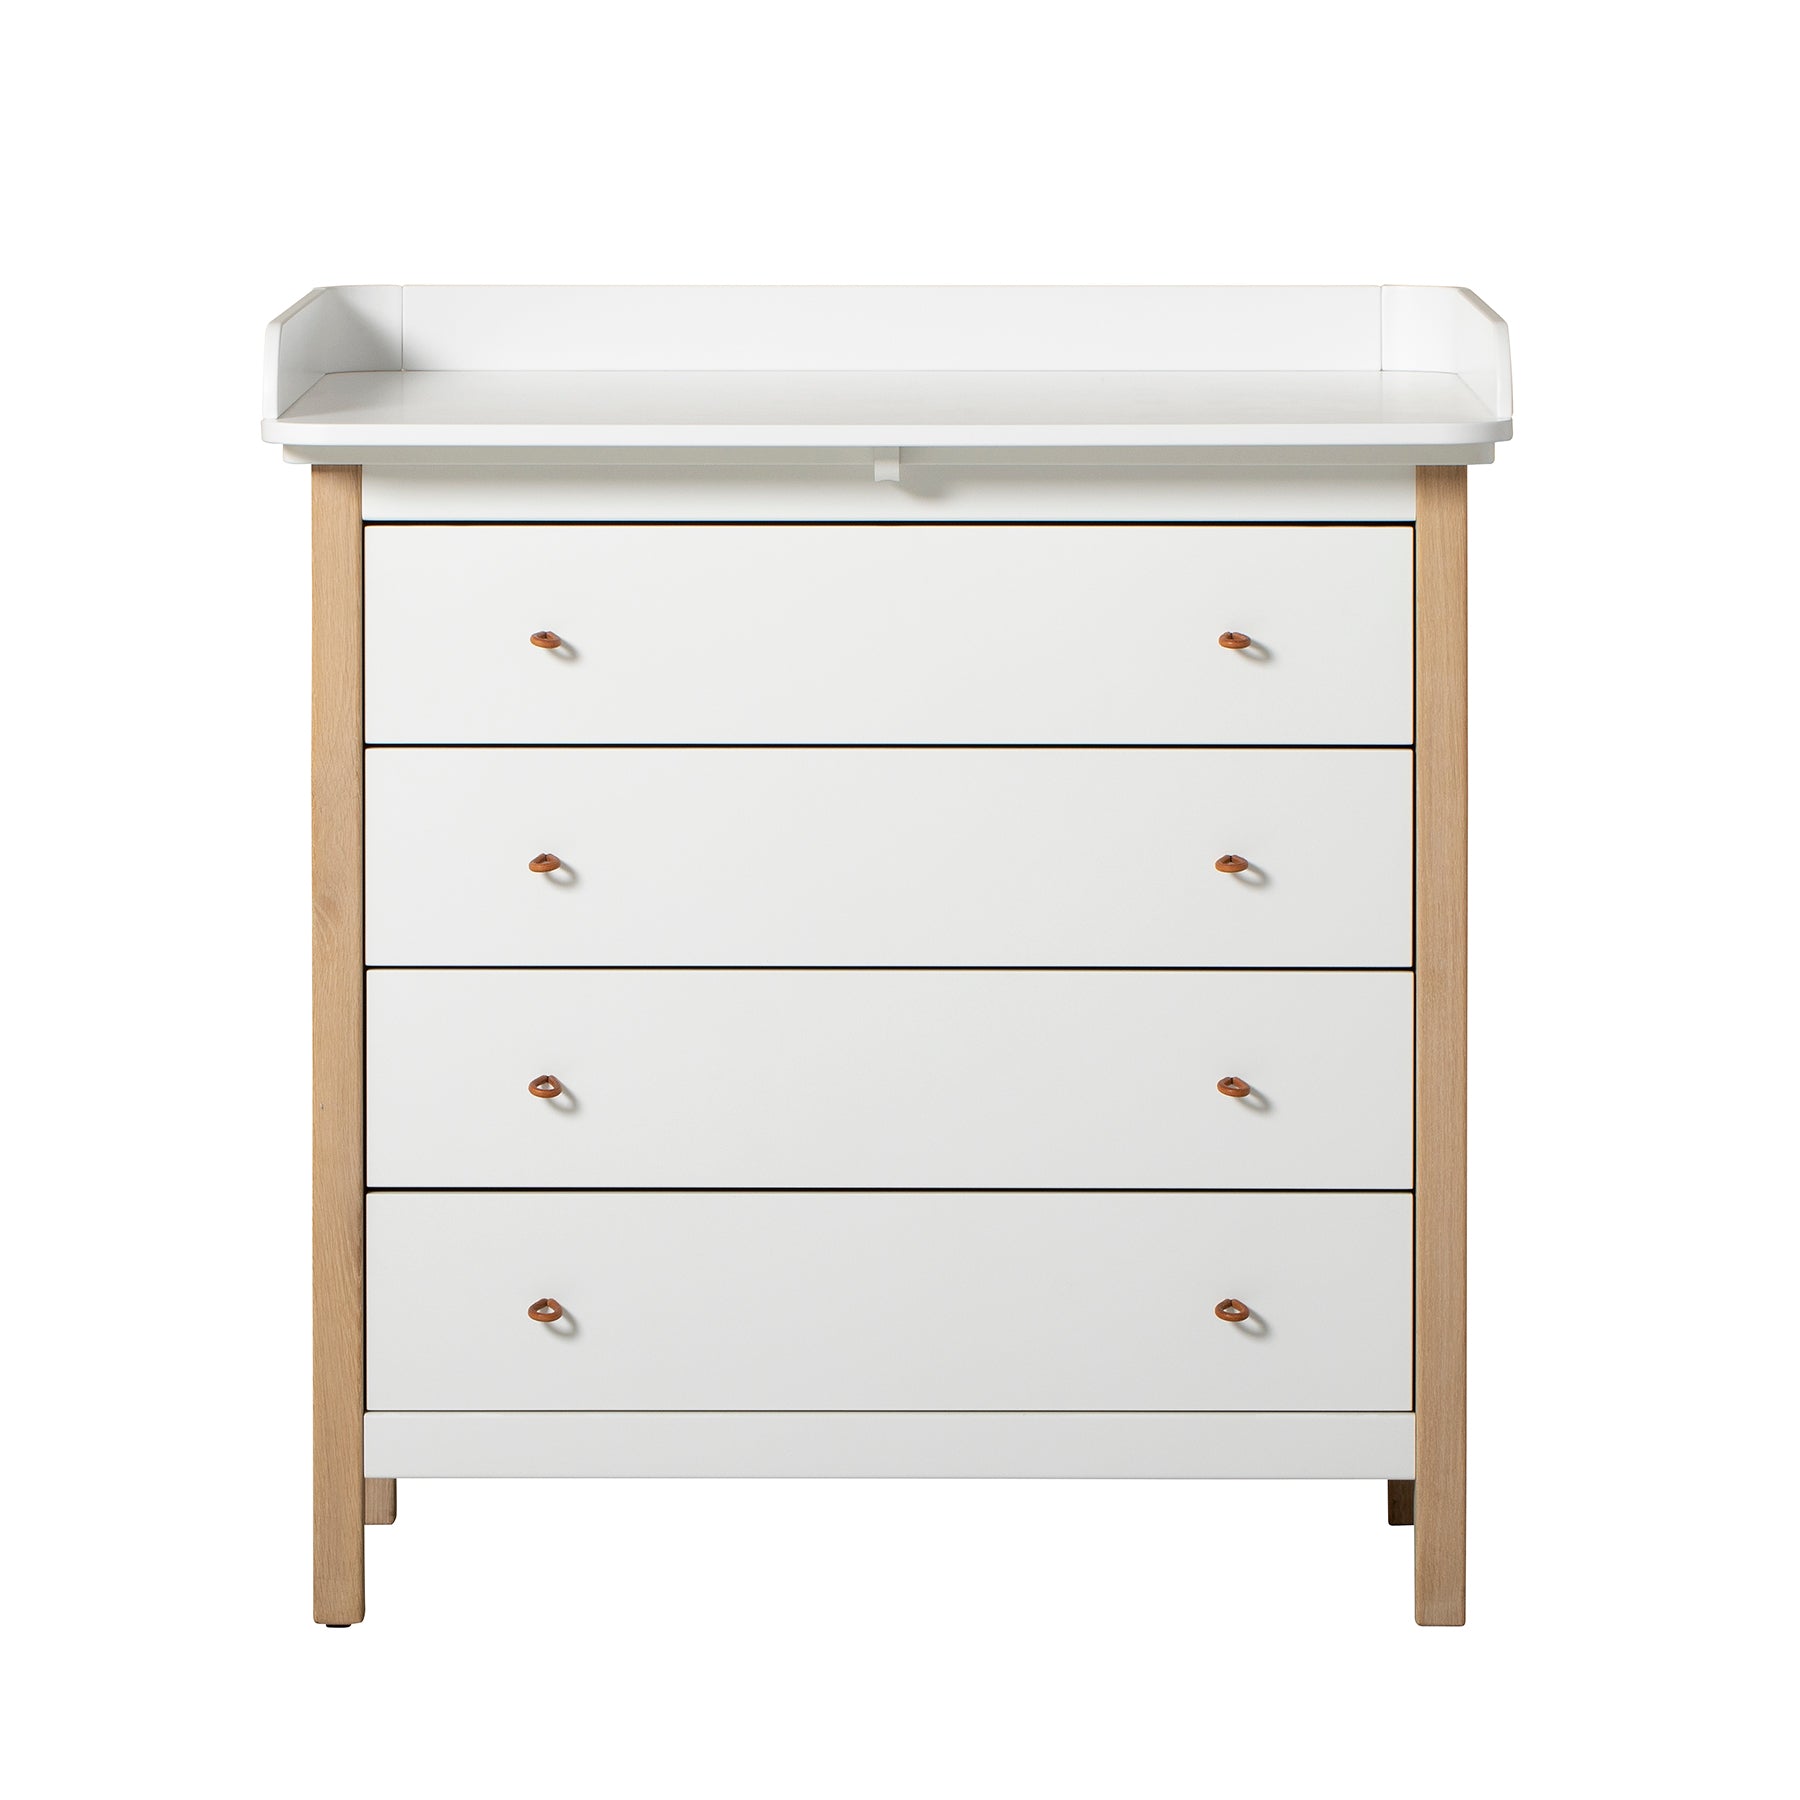 Oliver Furniture changing table Wood Collection, white/oak